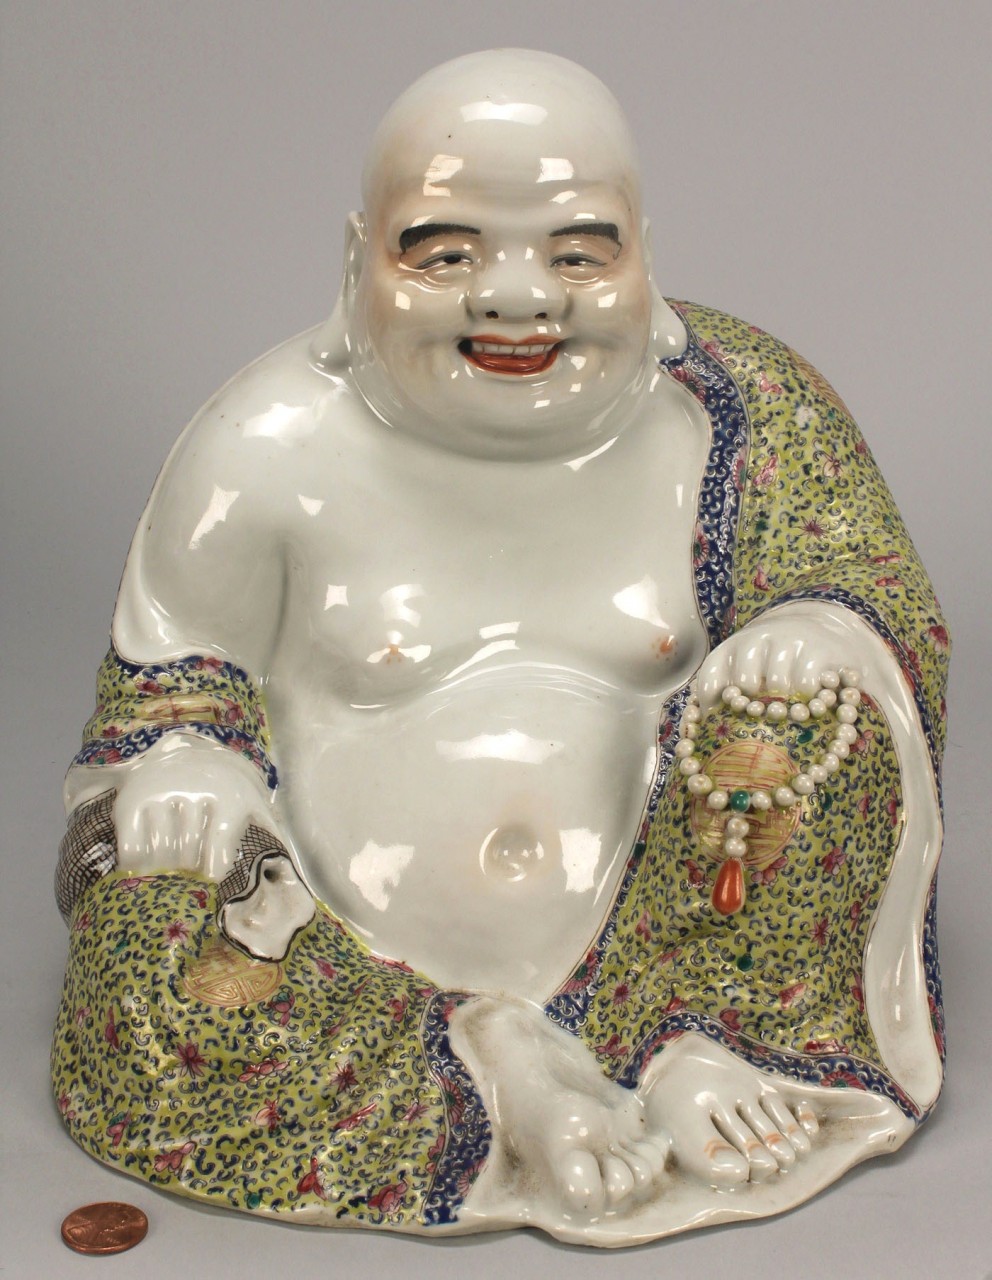 Lot 35: Two Chinese Famille Rose Porcelain Buddha Figures